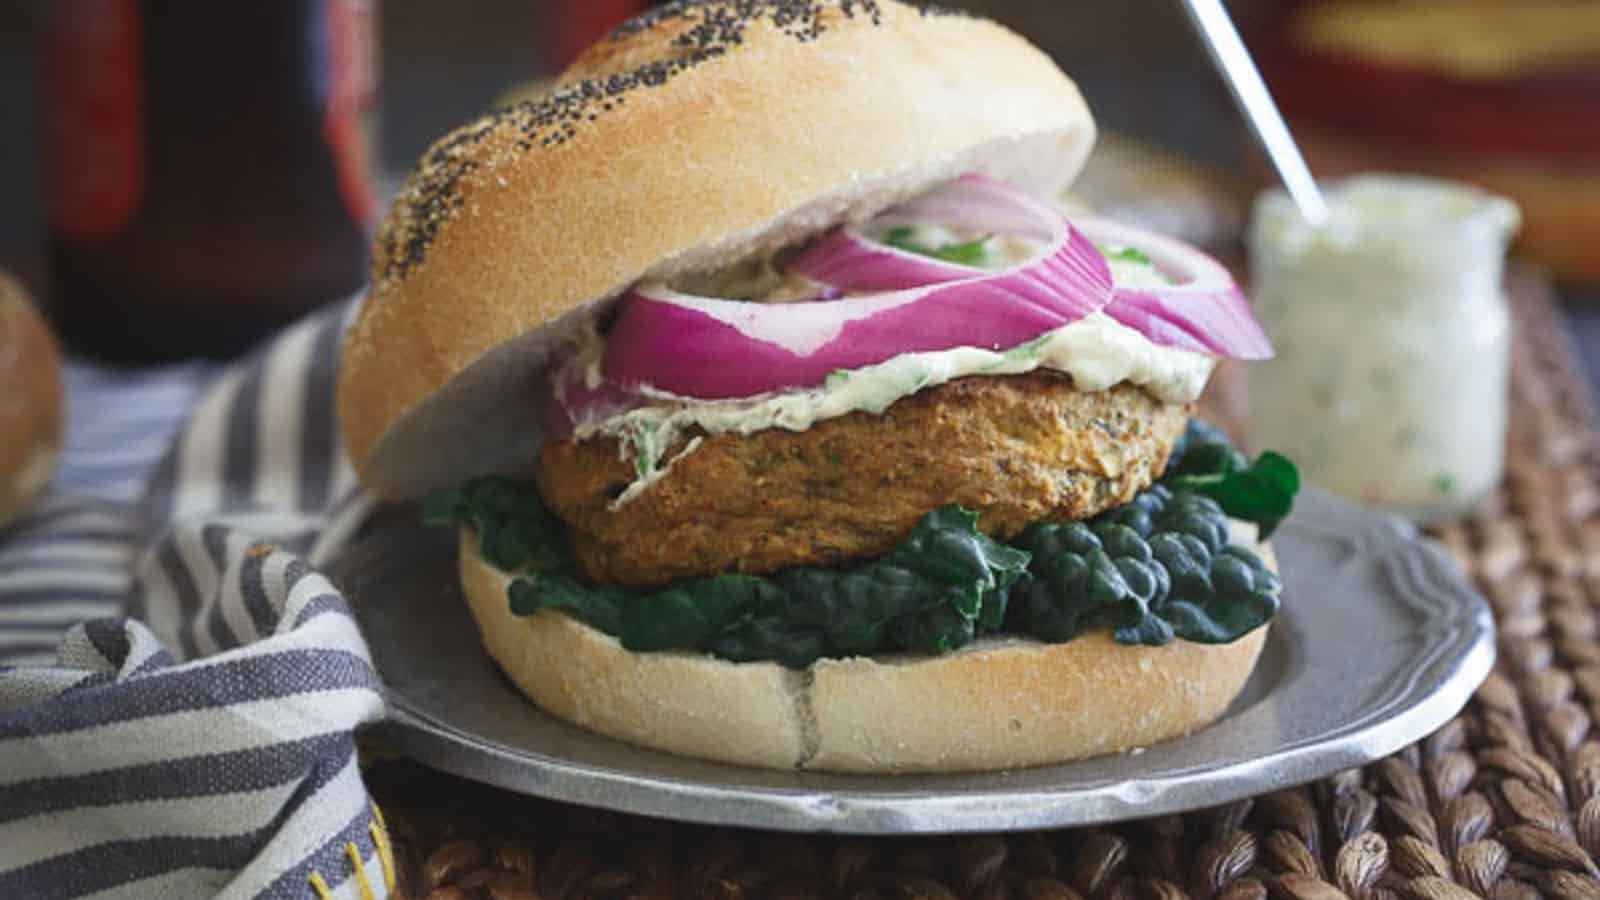 Roasted eggplant curry burger on a bun with kale, red onions and cilantro hummus sauce.